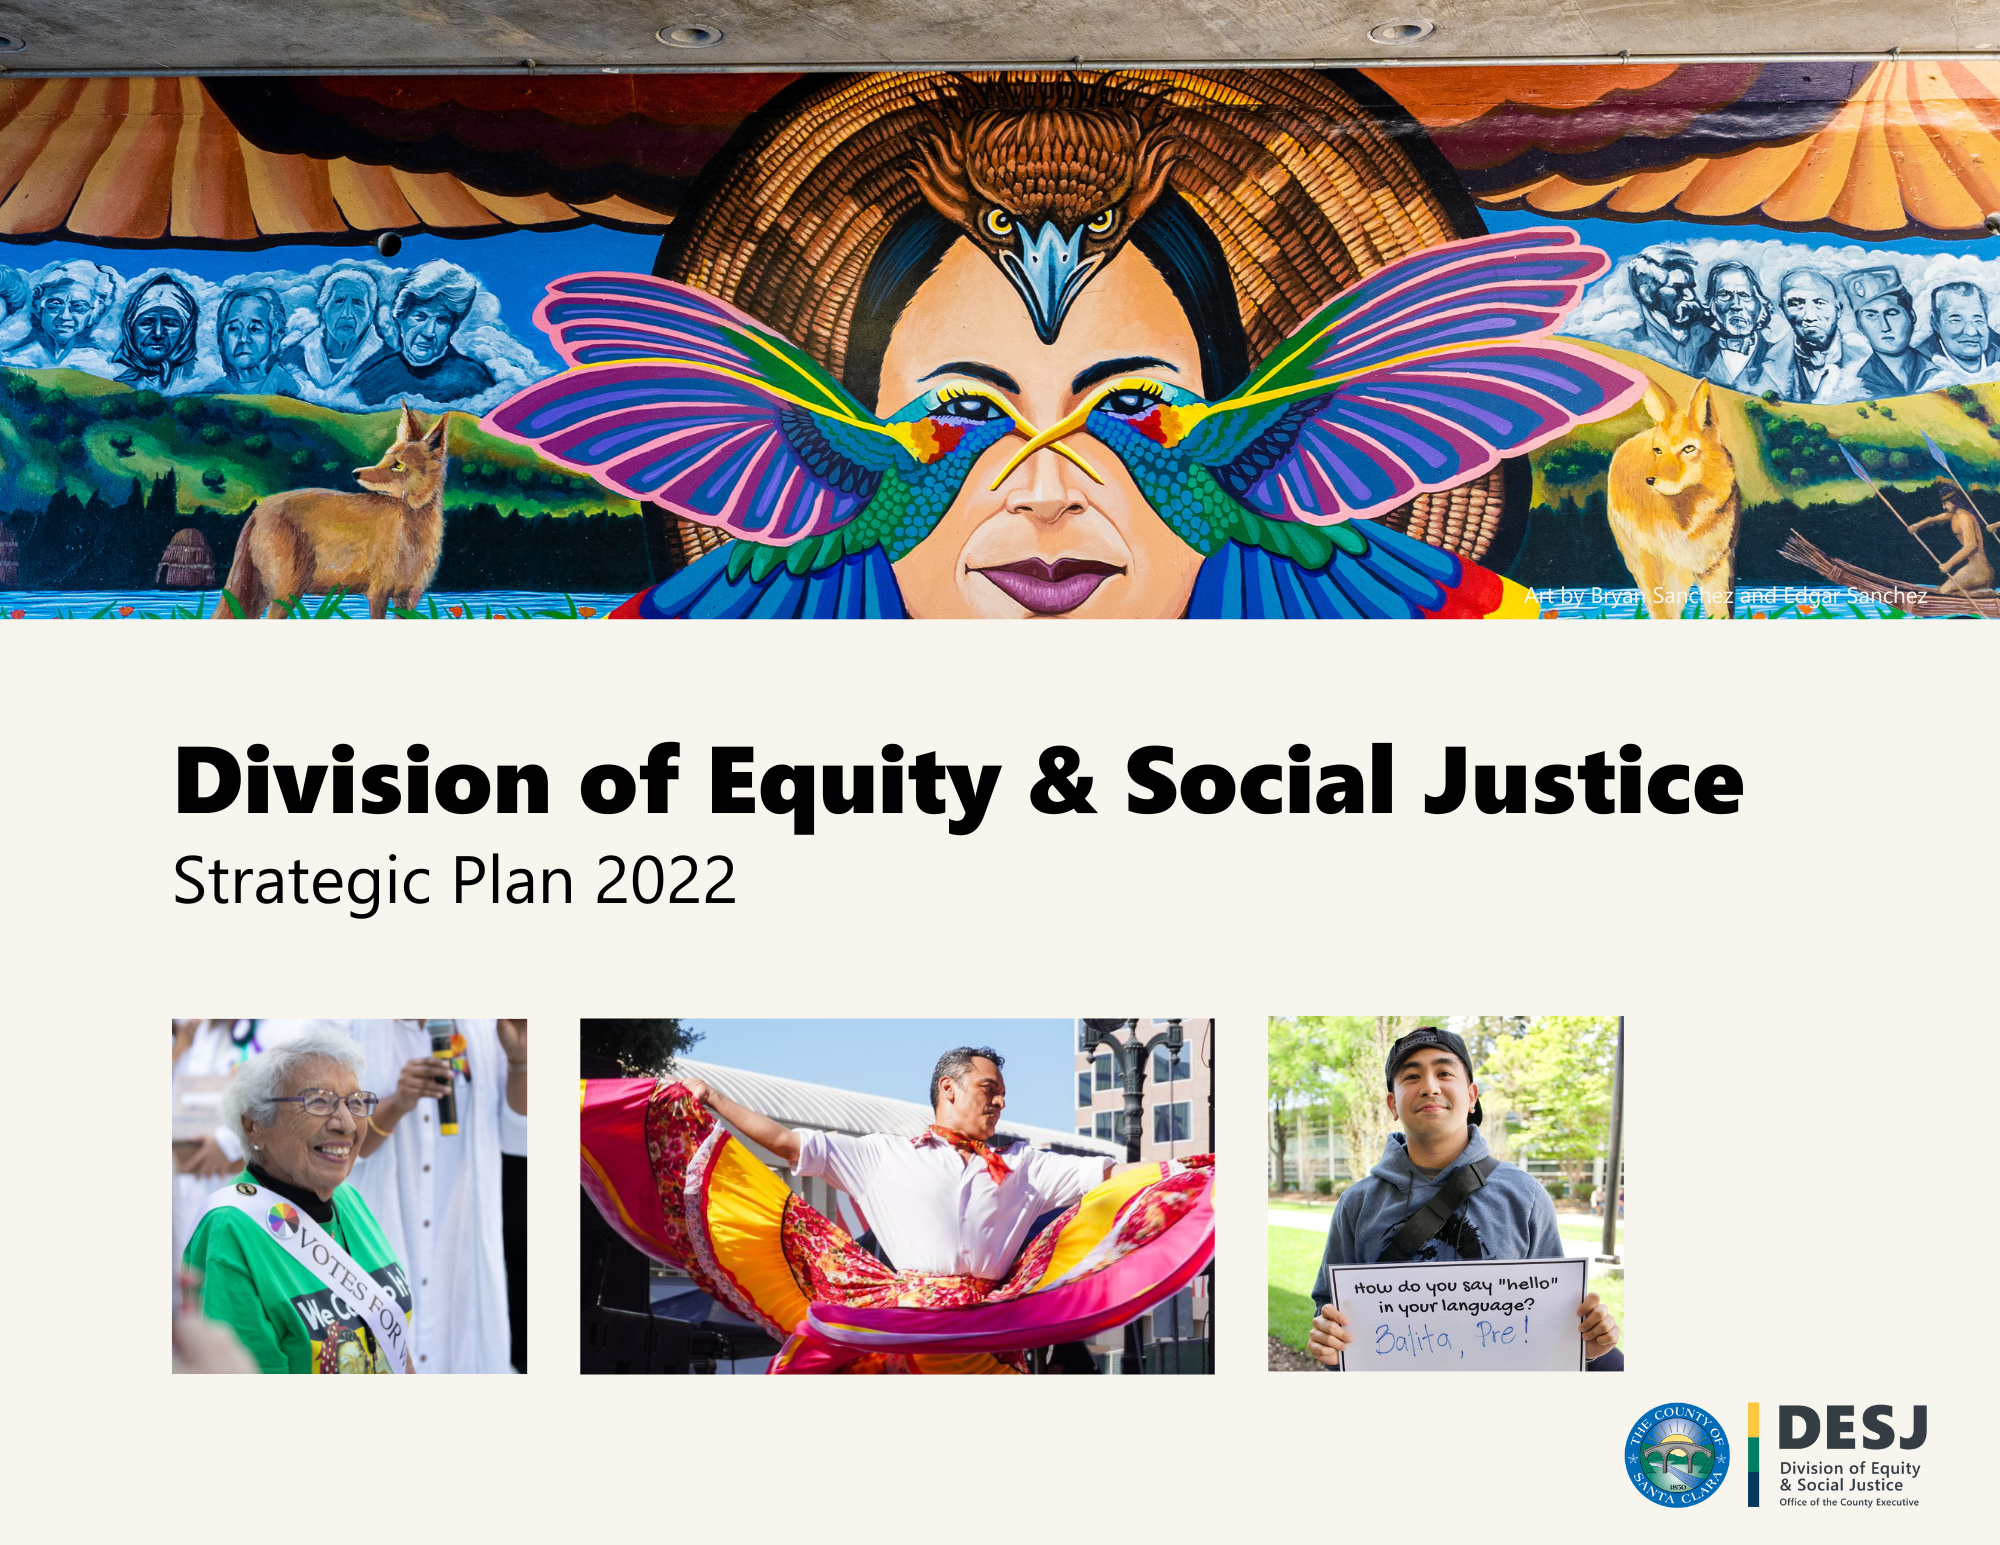 Division of Equity and Social Justice Strategic Plan cover